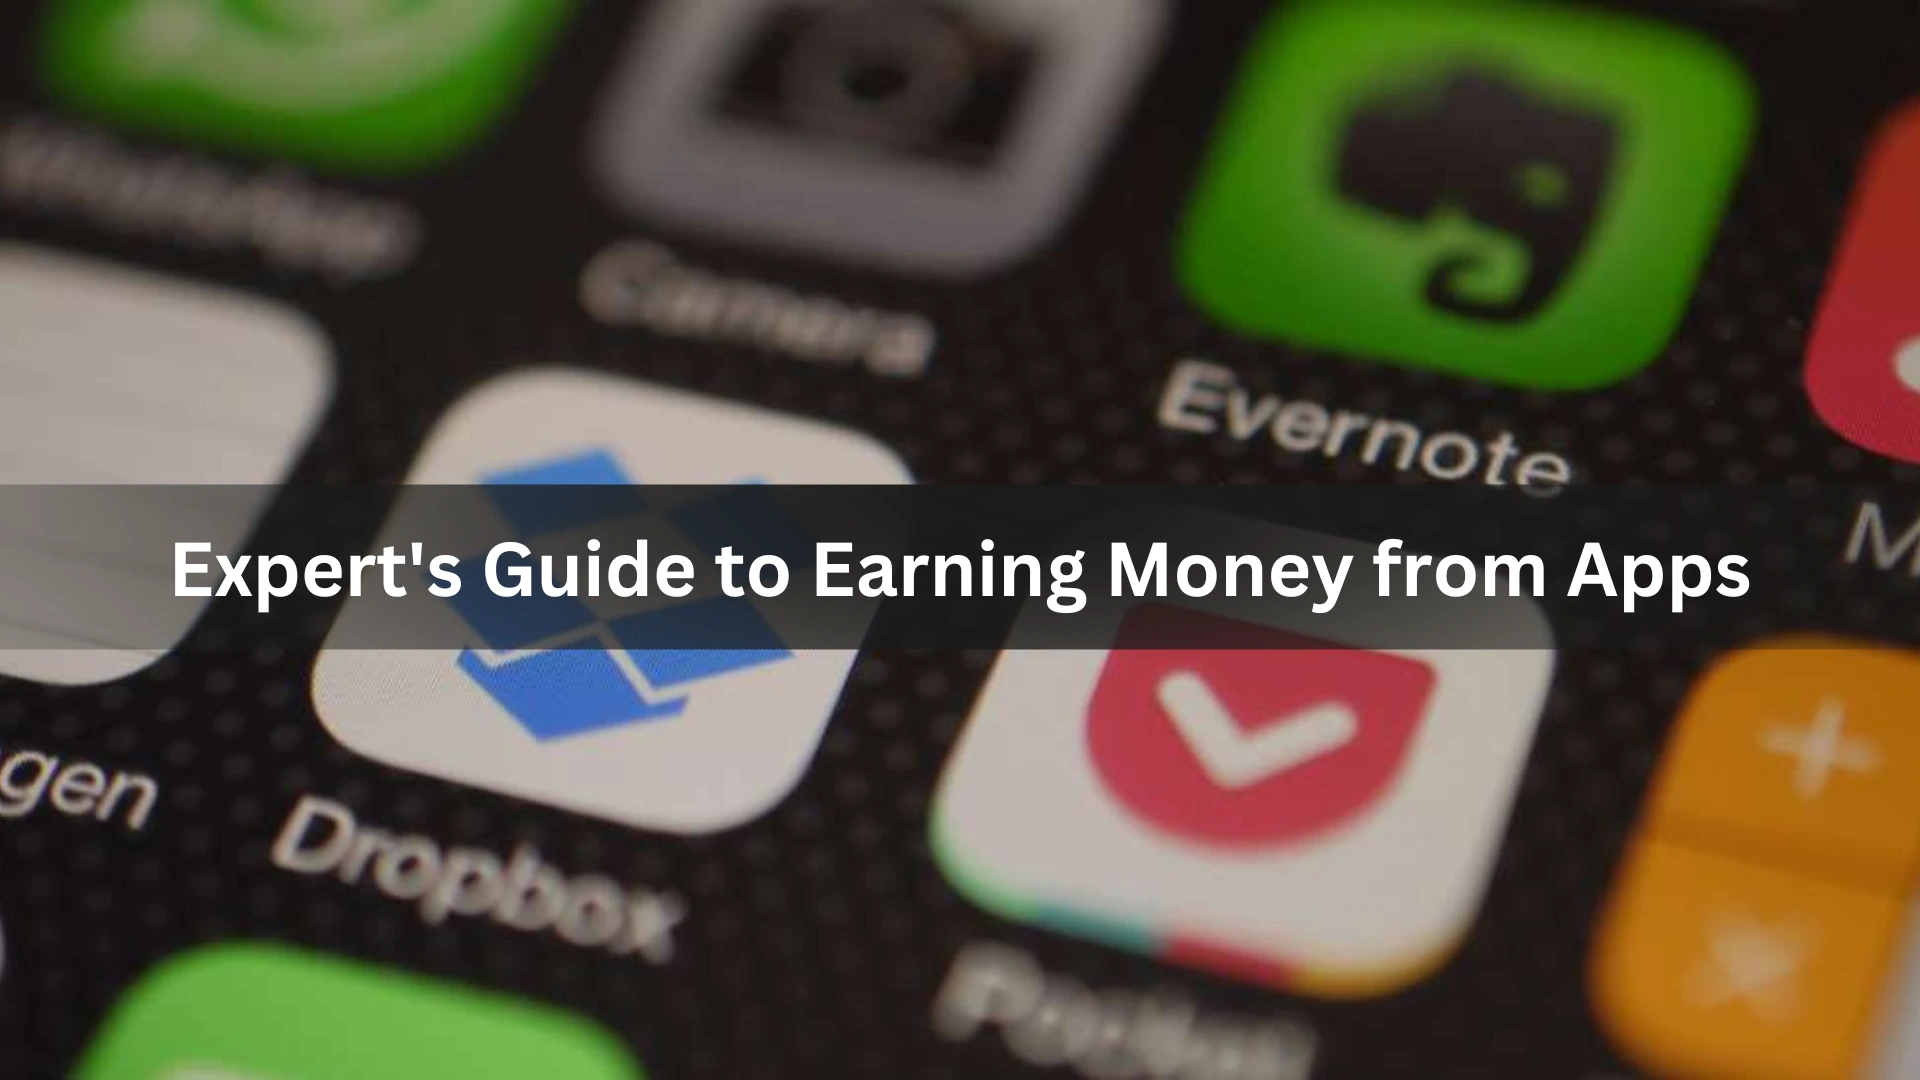 How I Mastered App Monetization: Expert’s Guide to Earning Money from Apps